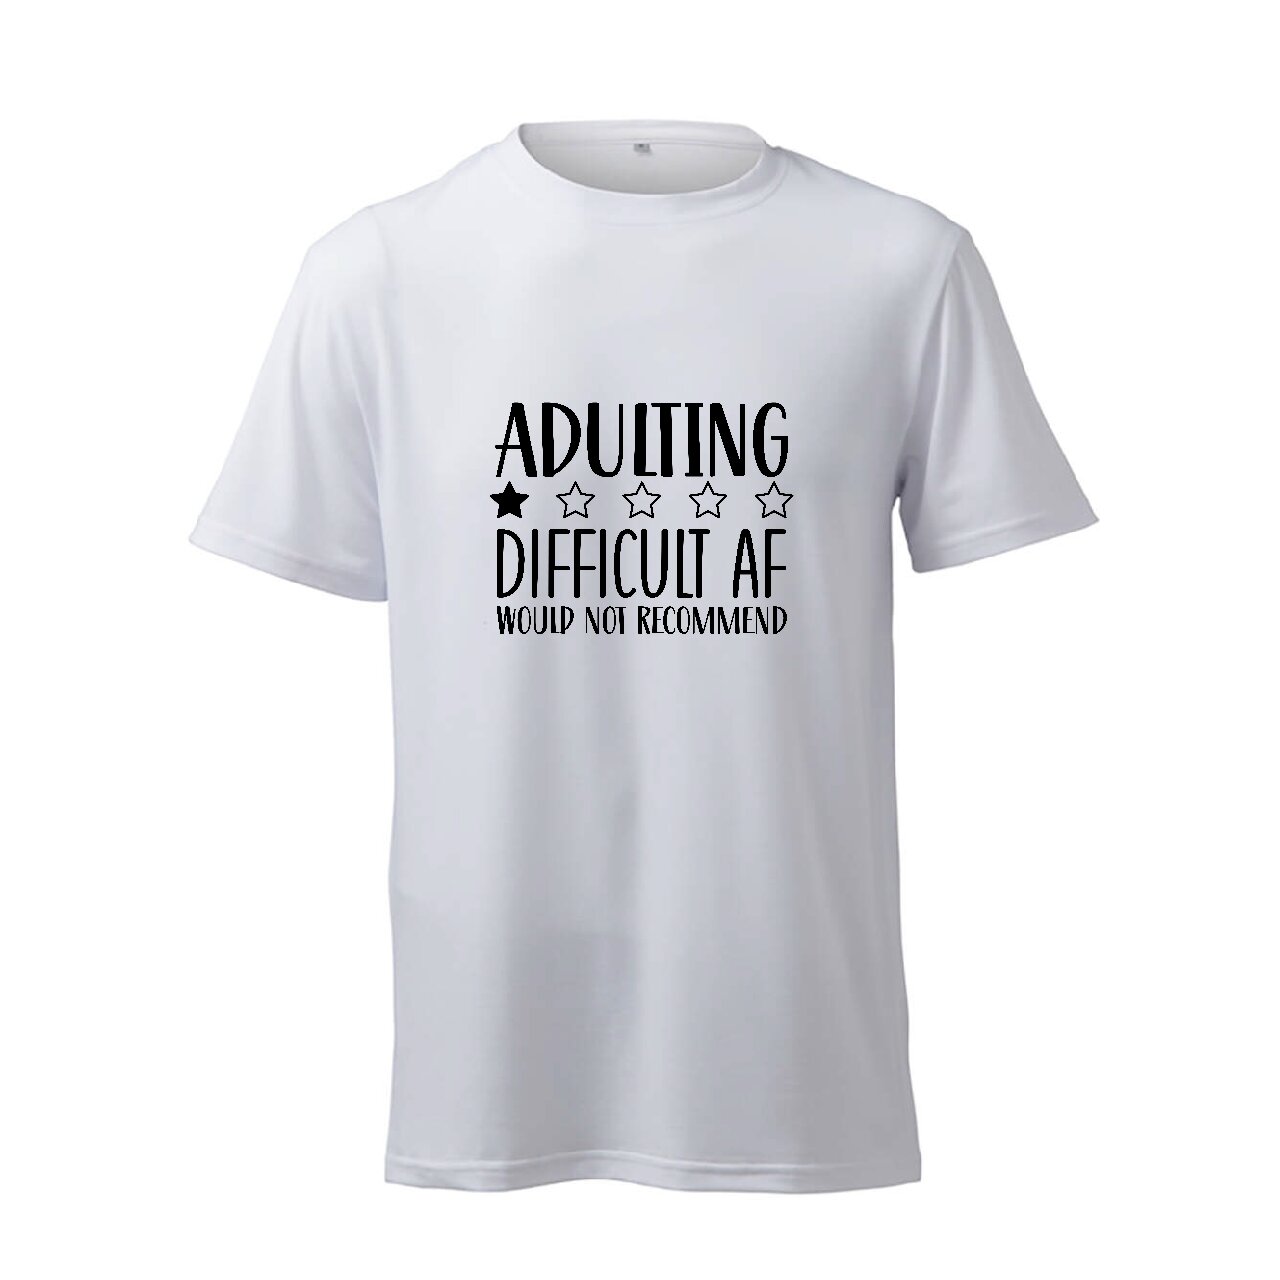 Adulting 1 Star Difficult AF Would Not Recommend  - T-Shirt